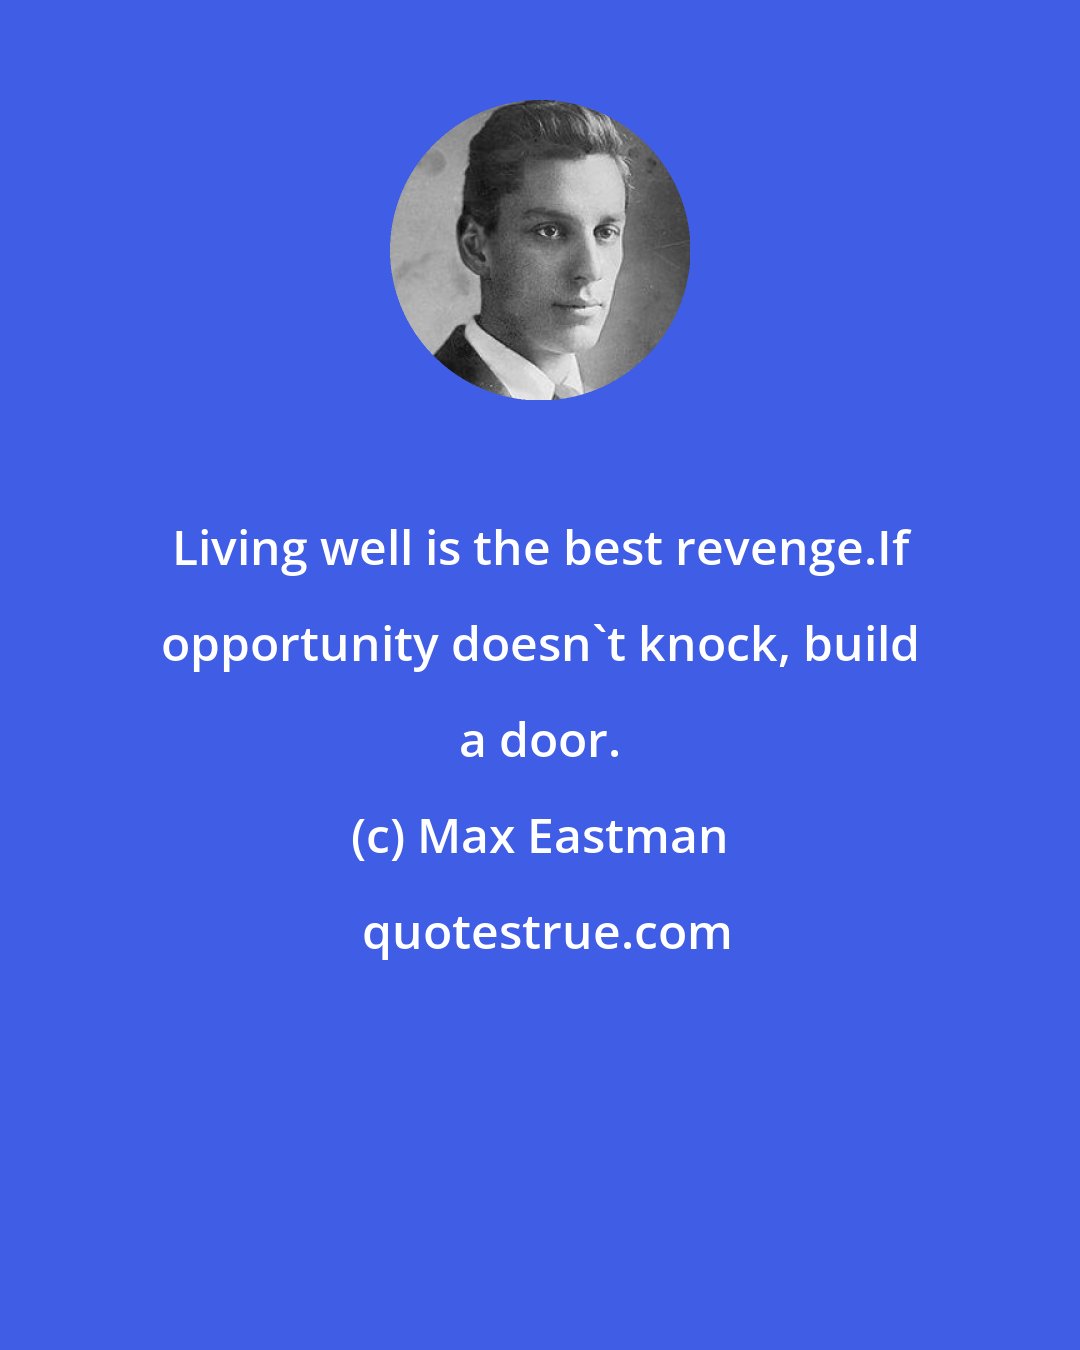 Max Eastman: Living well is the best revenge.If opportunity doesn't knock, build a door.